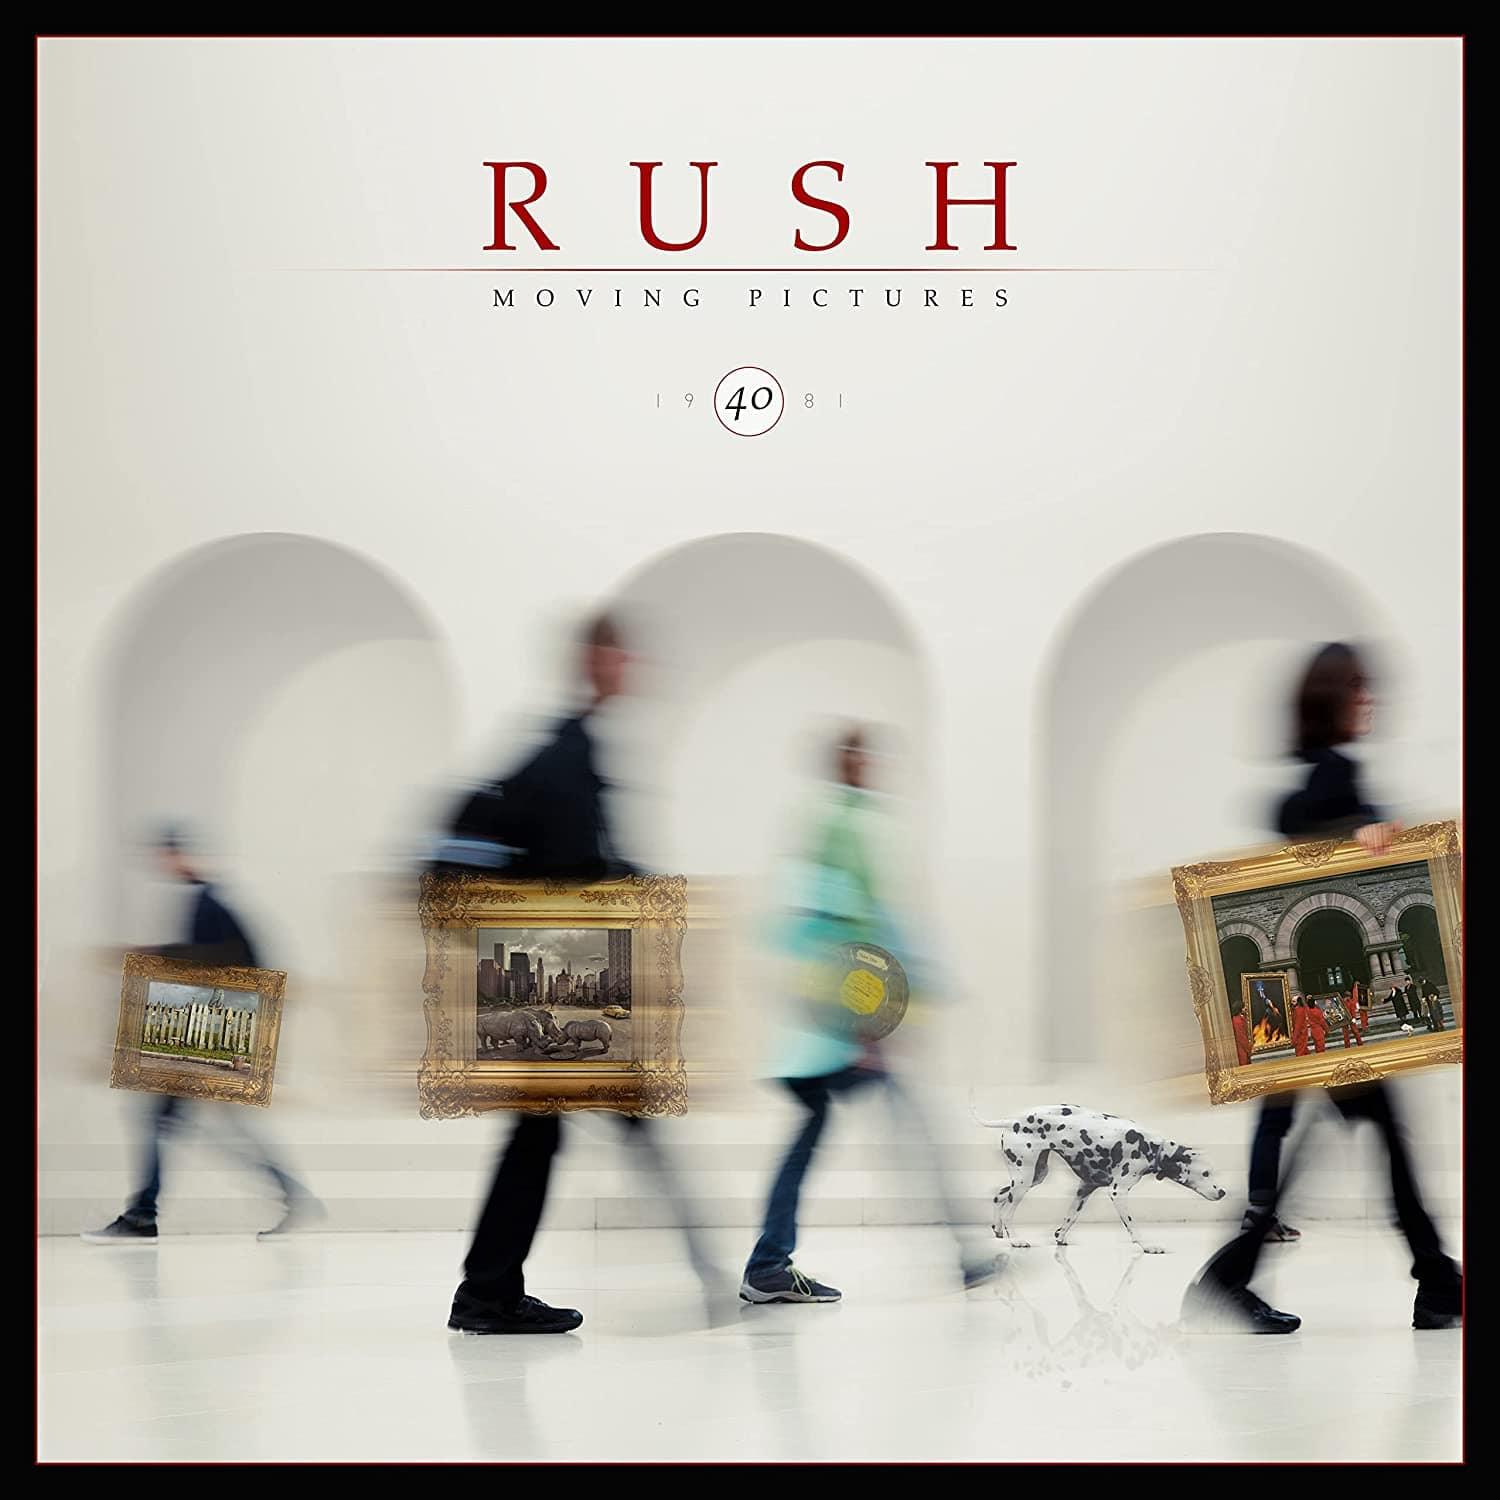 Rush - Moving Pictures (40th Anniversary, Deluxe Vinyl Box Set) (Half-Speed  Master) (5 LP)